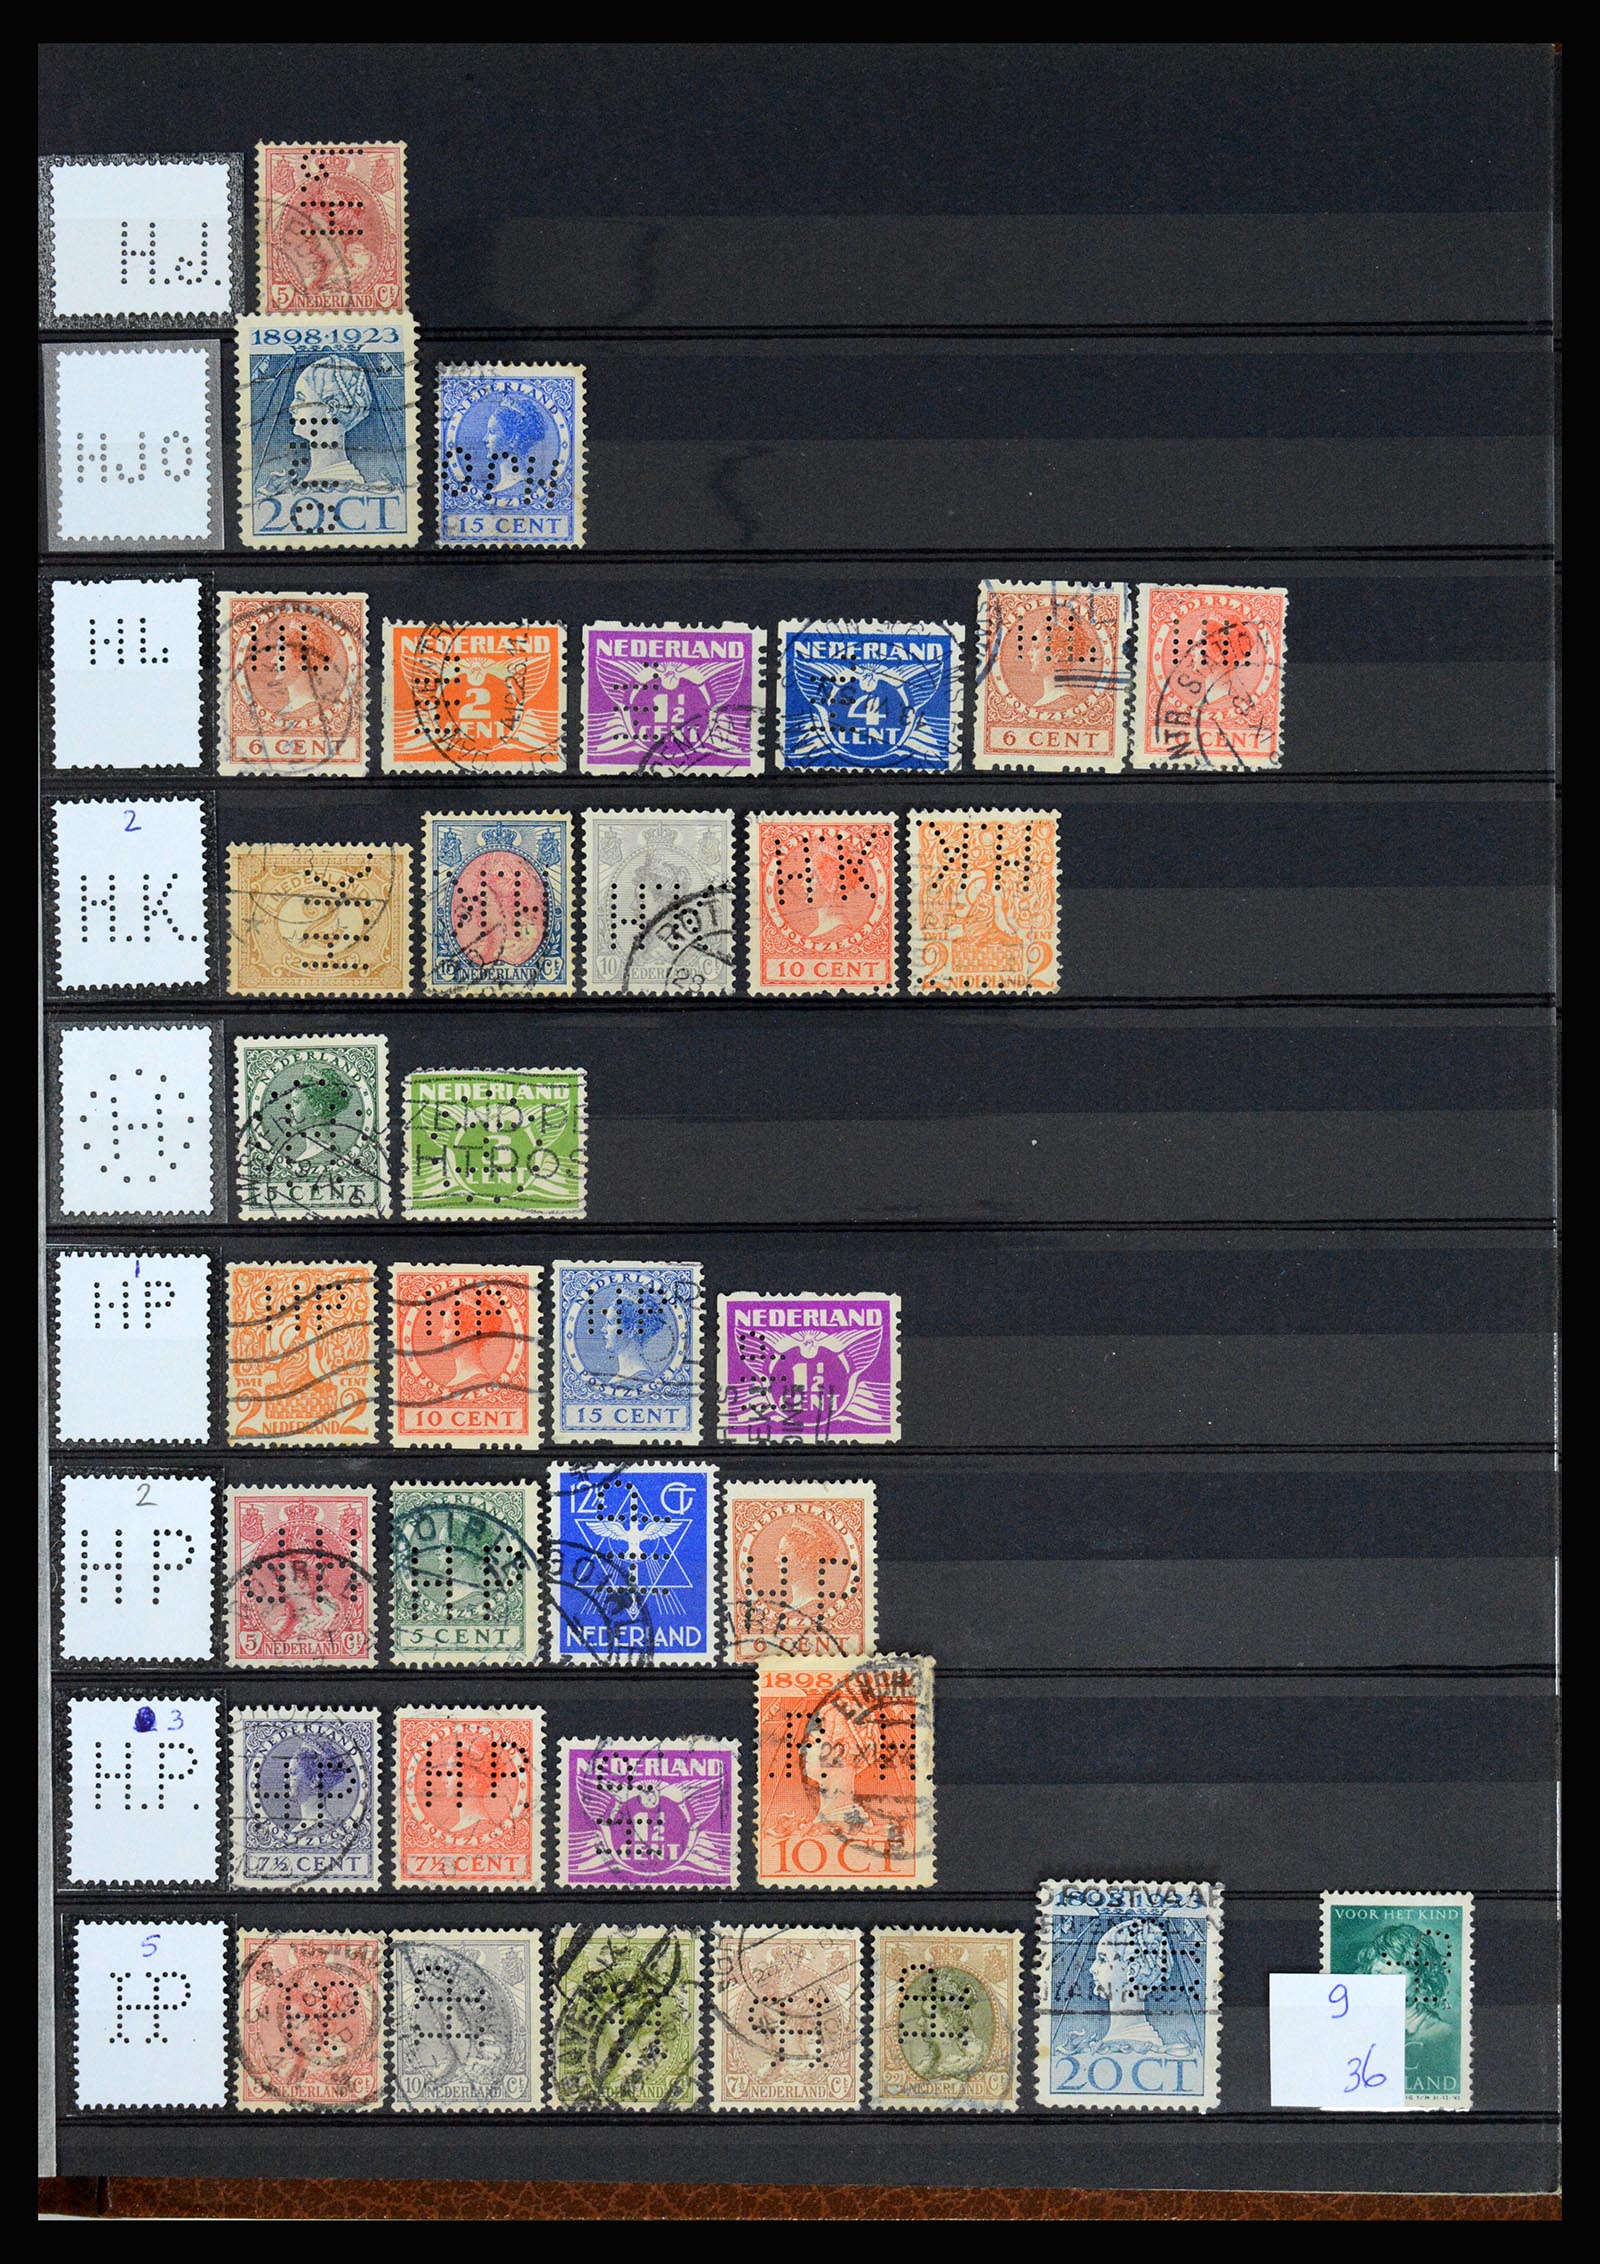 37183 018 - Stamp collection 37183 Netherlands perfins 1872-1960.